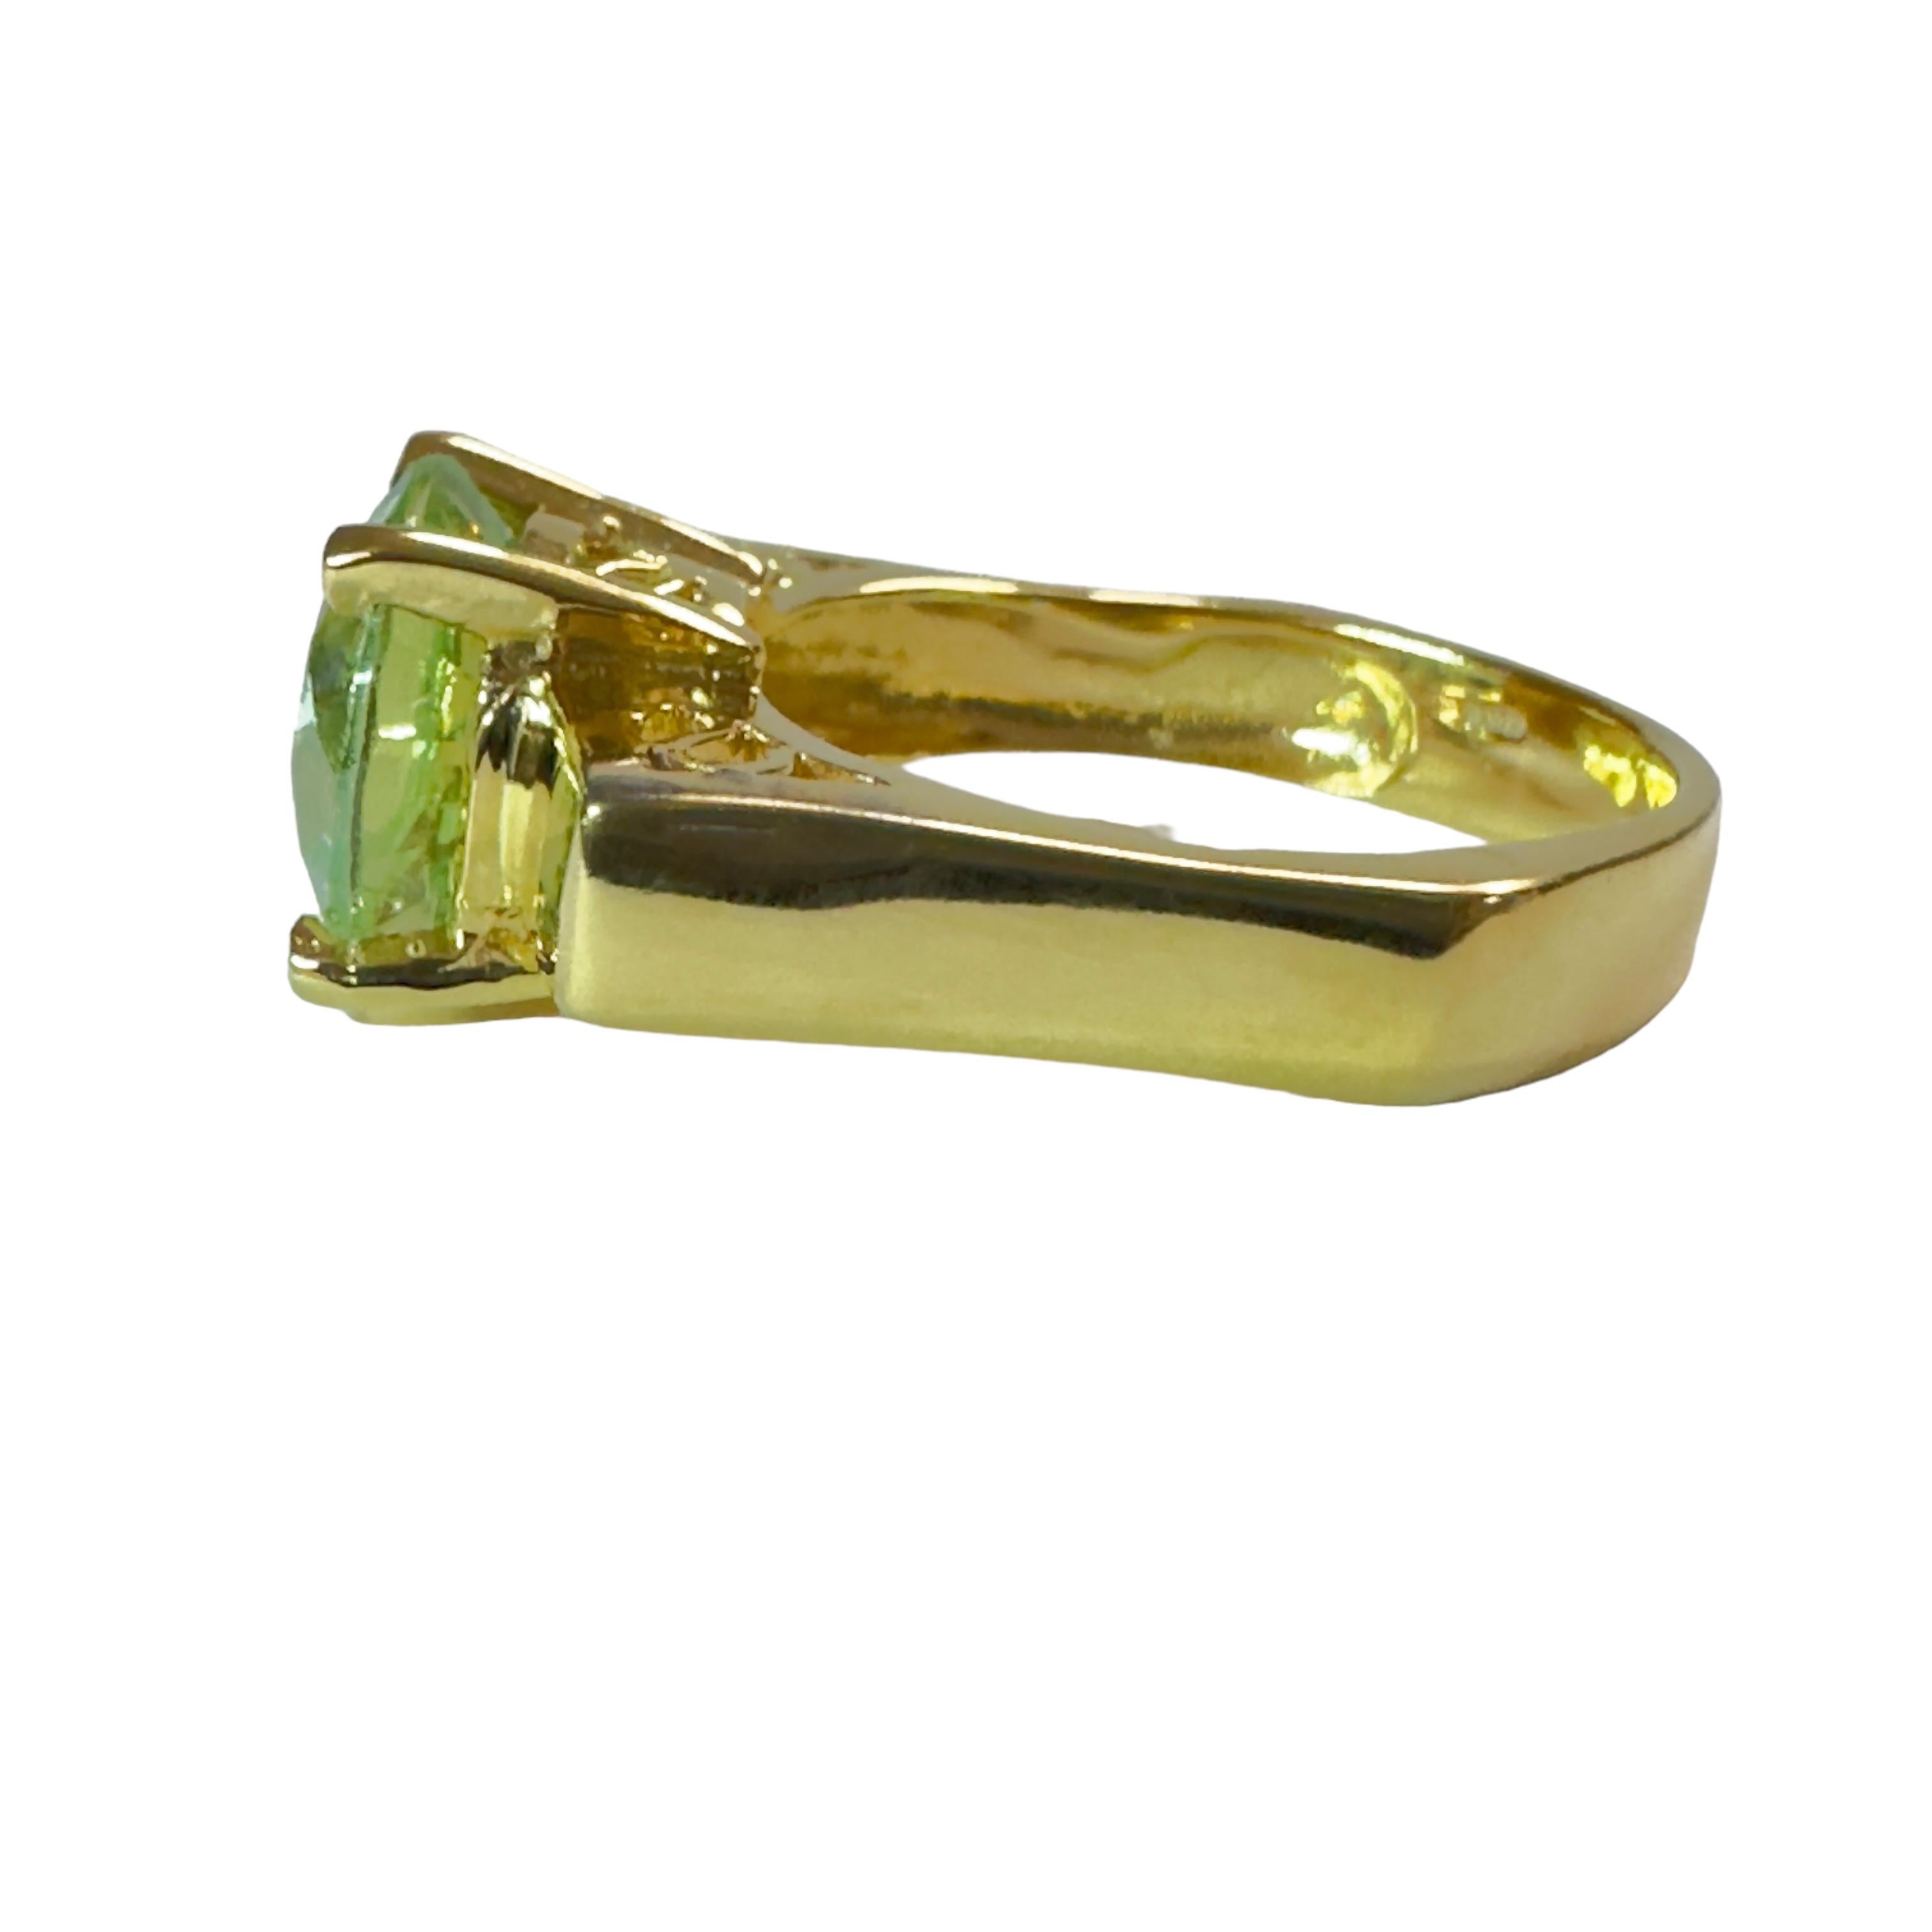 This is a very cool looking ring.  I love the squared setting it has.  This stone is from Africa and just a beautiful color of green. The setting is beautiful yellow gold plating which really compliments the stone.  The ring is a size 6.5.   It is a